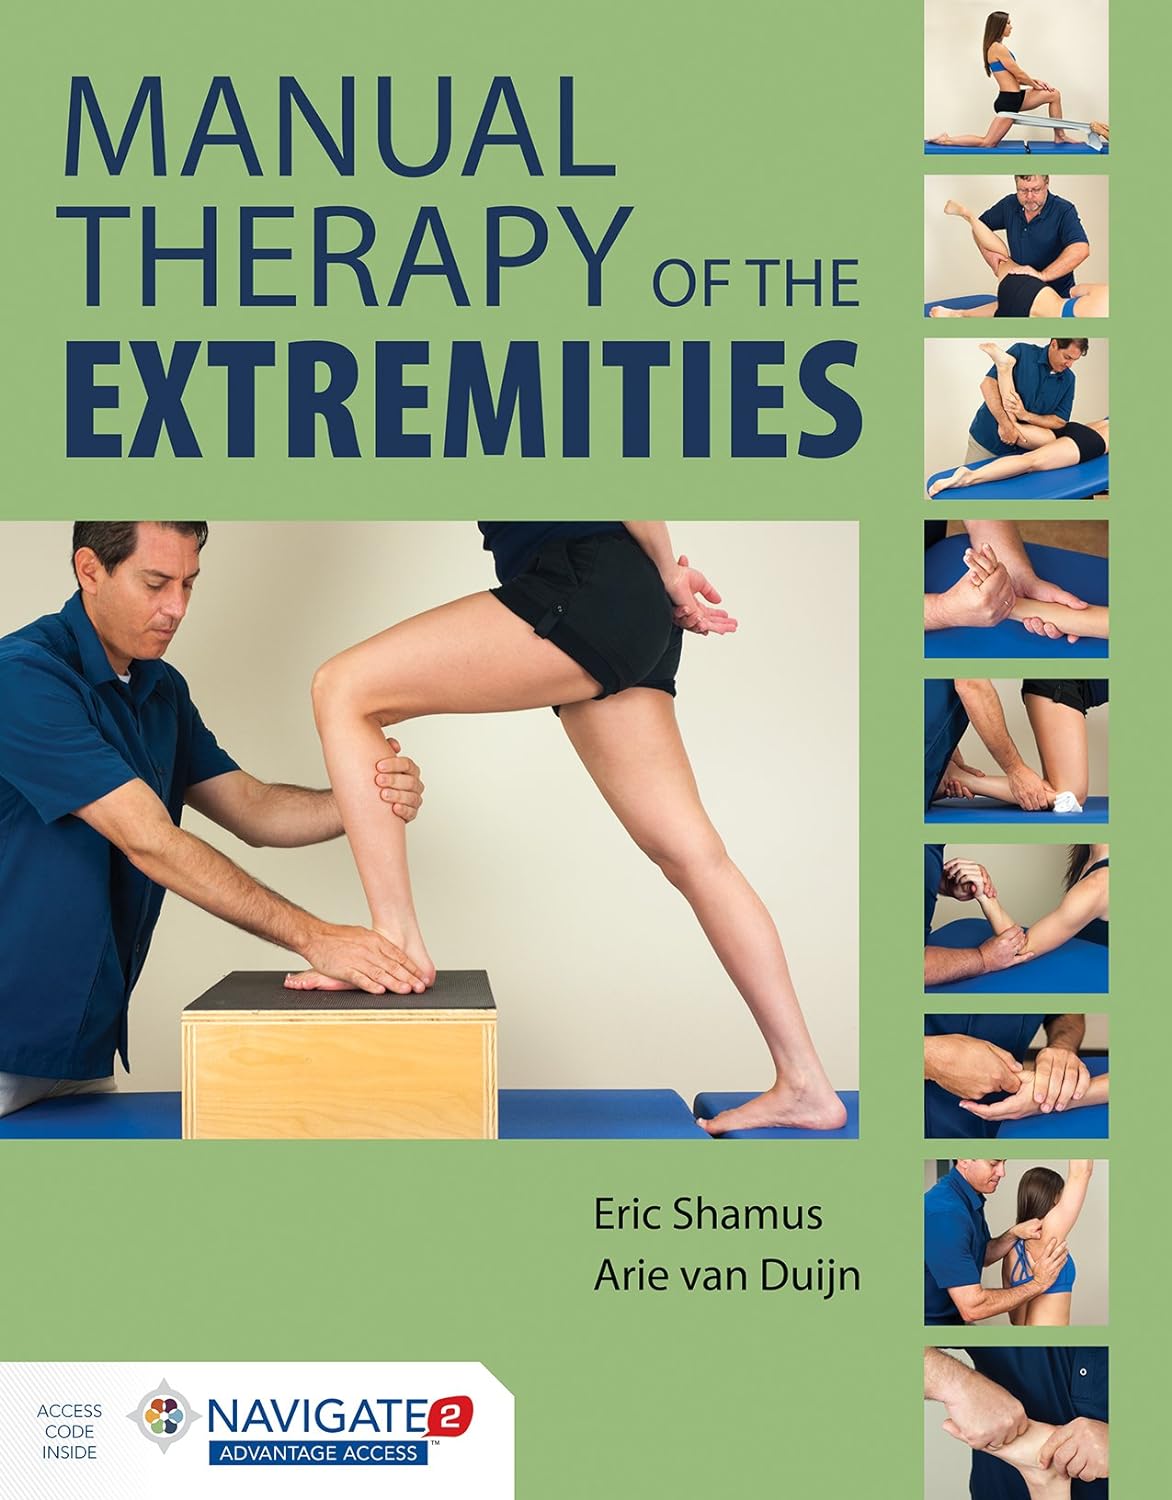 Manual-Therapy-of-the-Extremities-1st-Edition-1.jpg